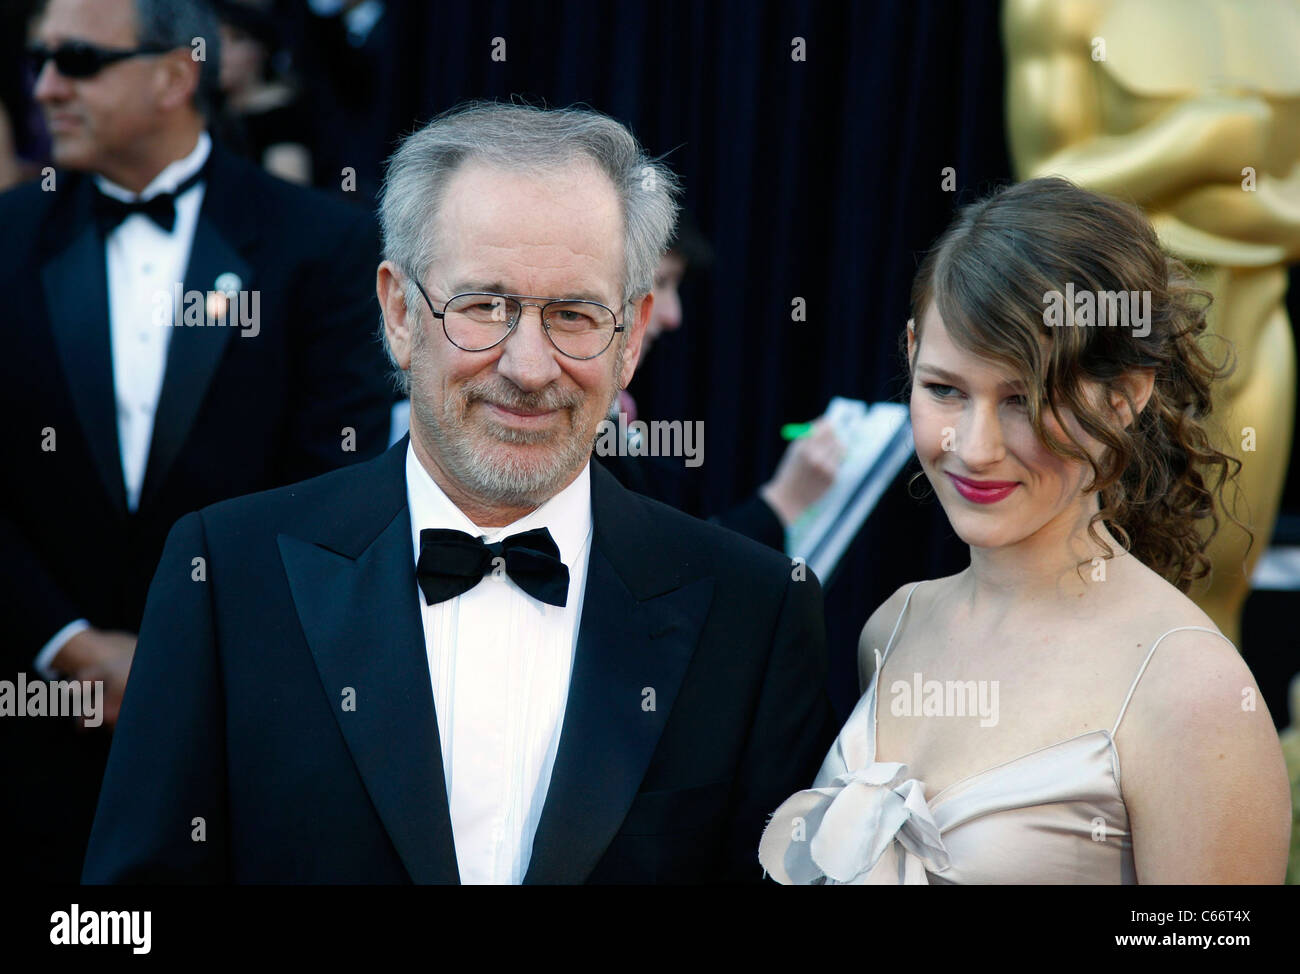 Steven Spielberg at arrivals for The 83rd Academy Awards Oscars - Arrivals Part 1, The Kodak Theatre, Los Angeles, CA February 27, 2011. Photo By: Jef Hernandez/Everett Collection Stock Photo